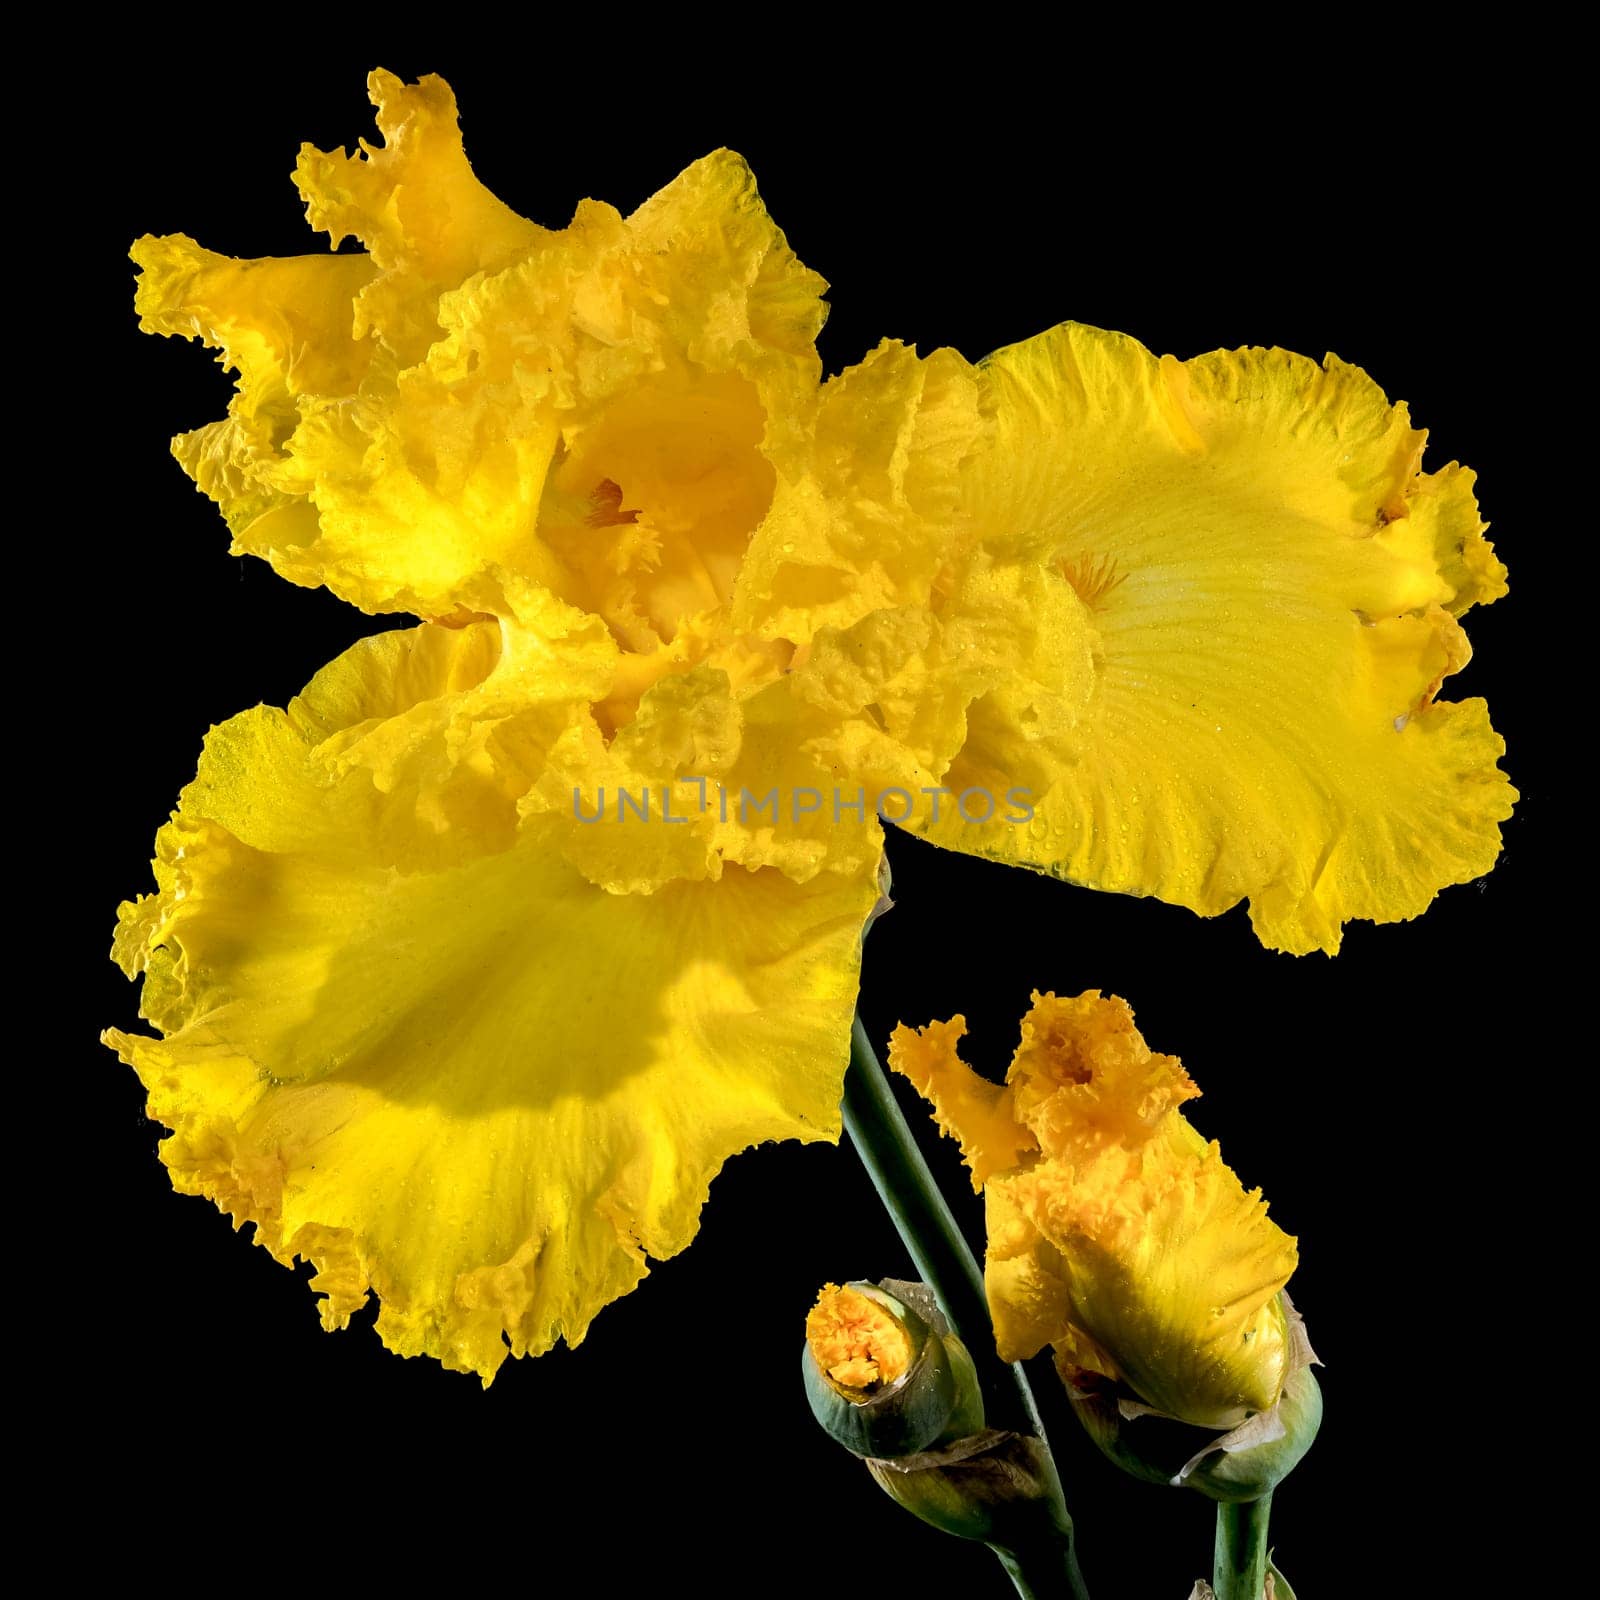 Blooming yellow iris on a black background by Multipedia